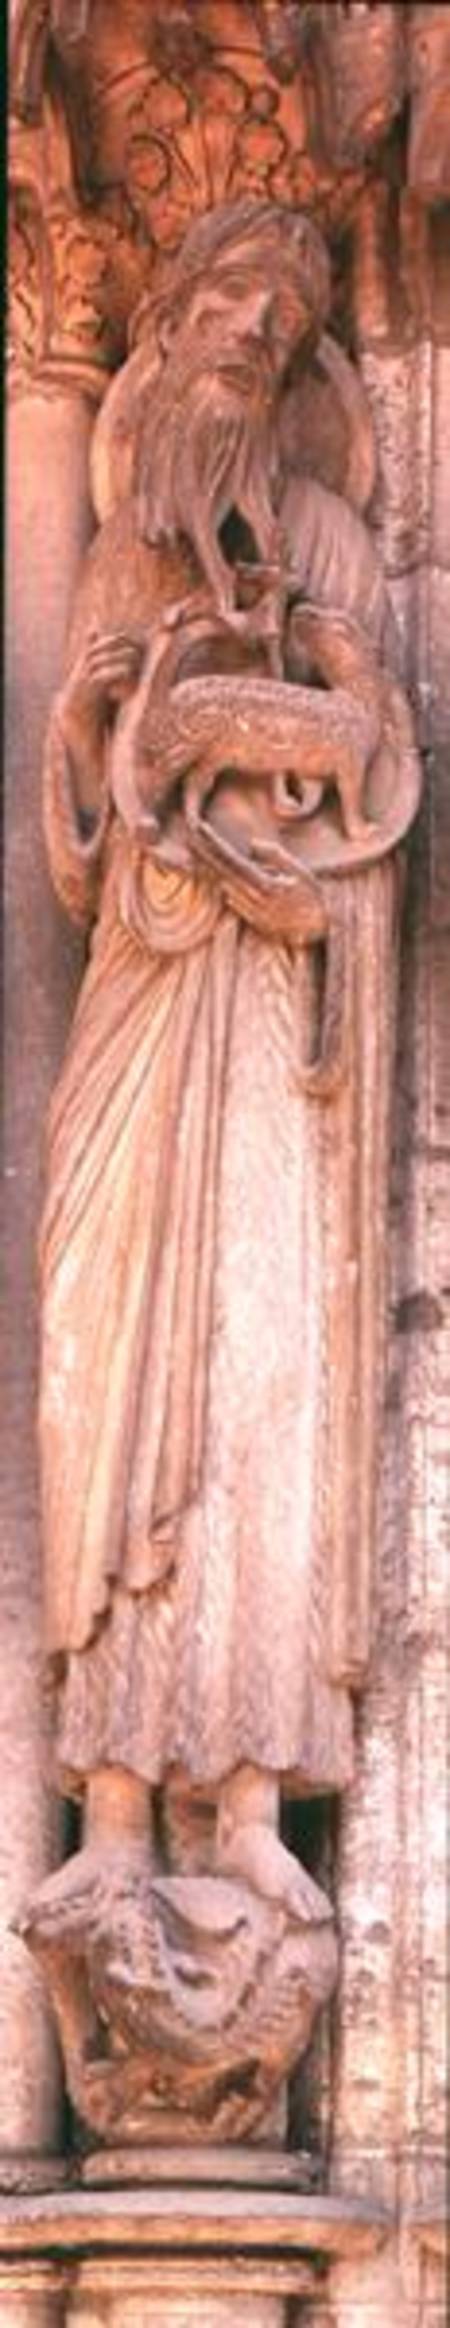 St. John the Baptist, jamb figure from the right hand side of the central door of the north portal von French School